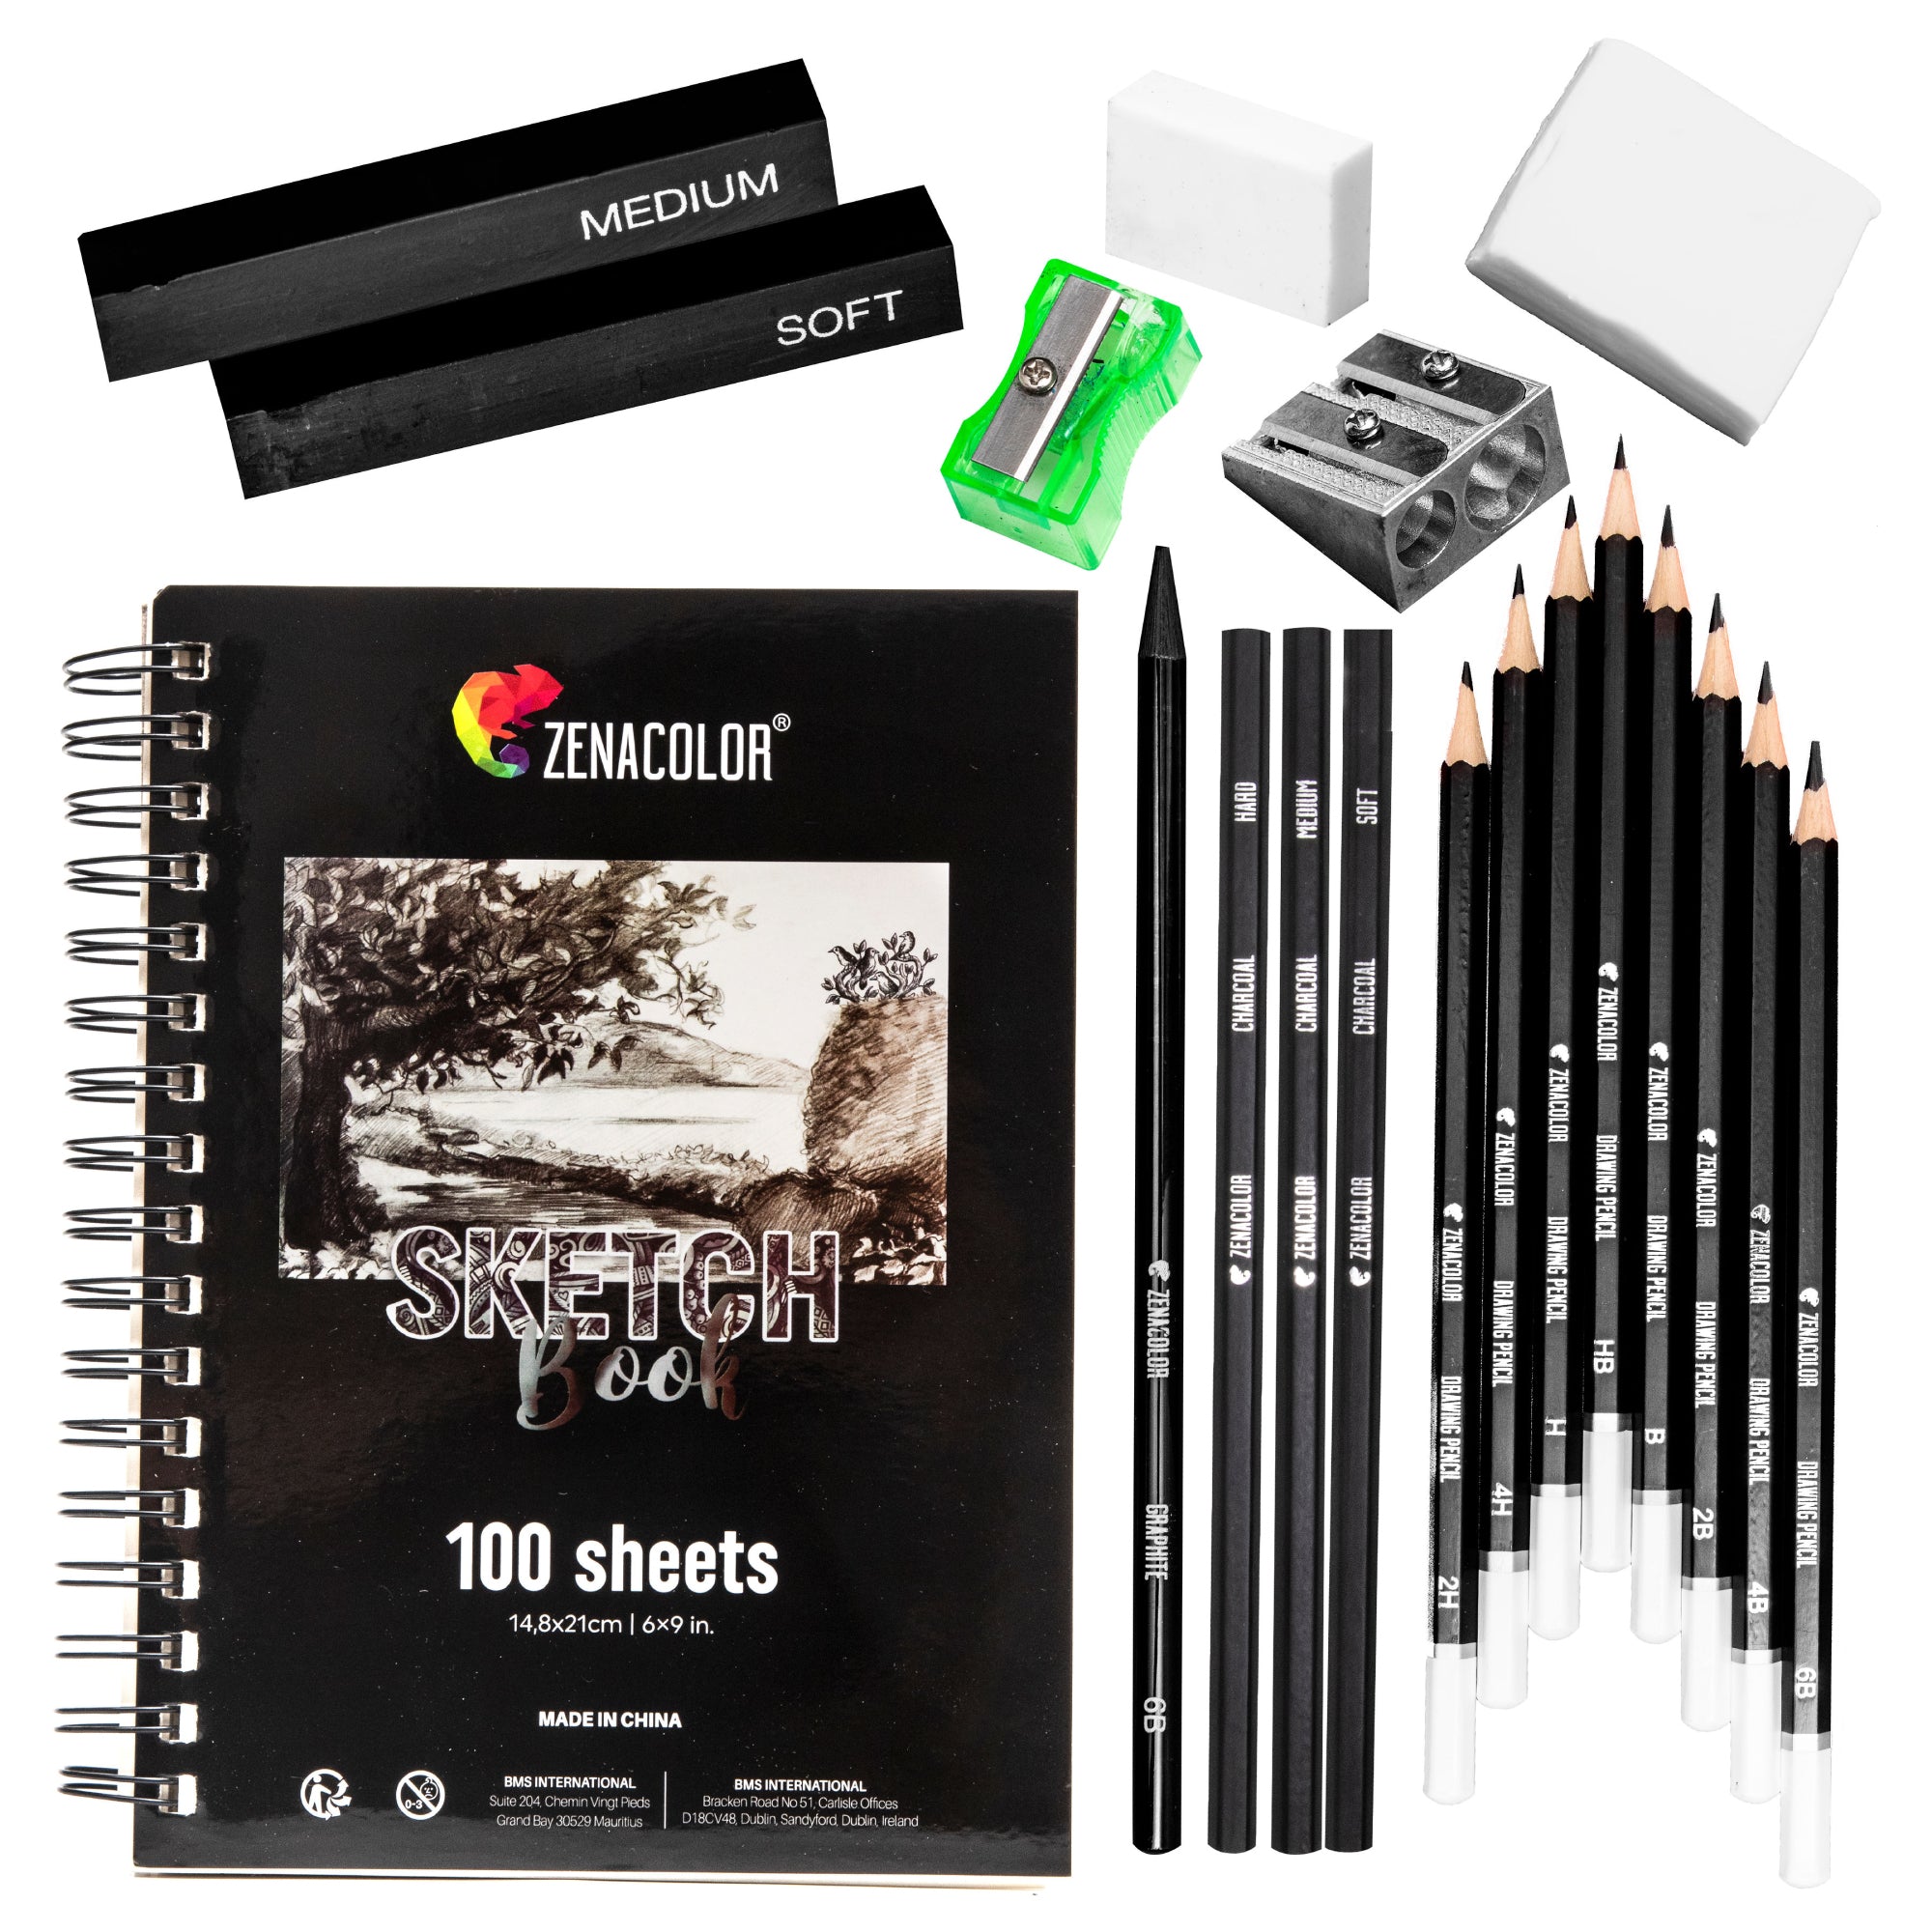 Drawing Set - Sketching and Charcoal Pencils - 100 Page Drawing